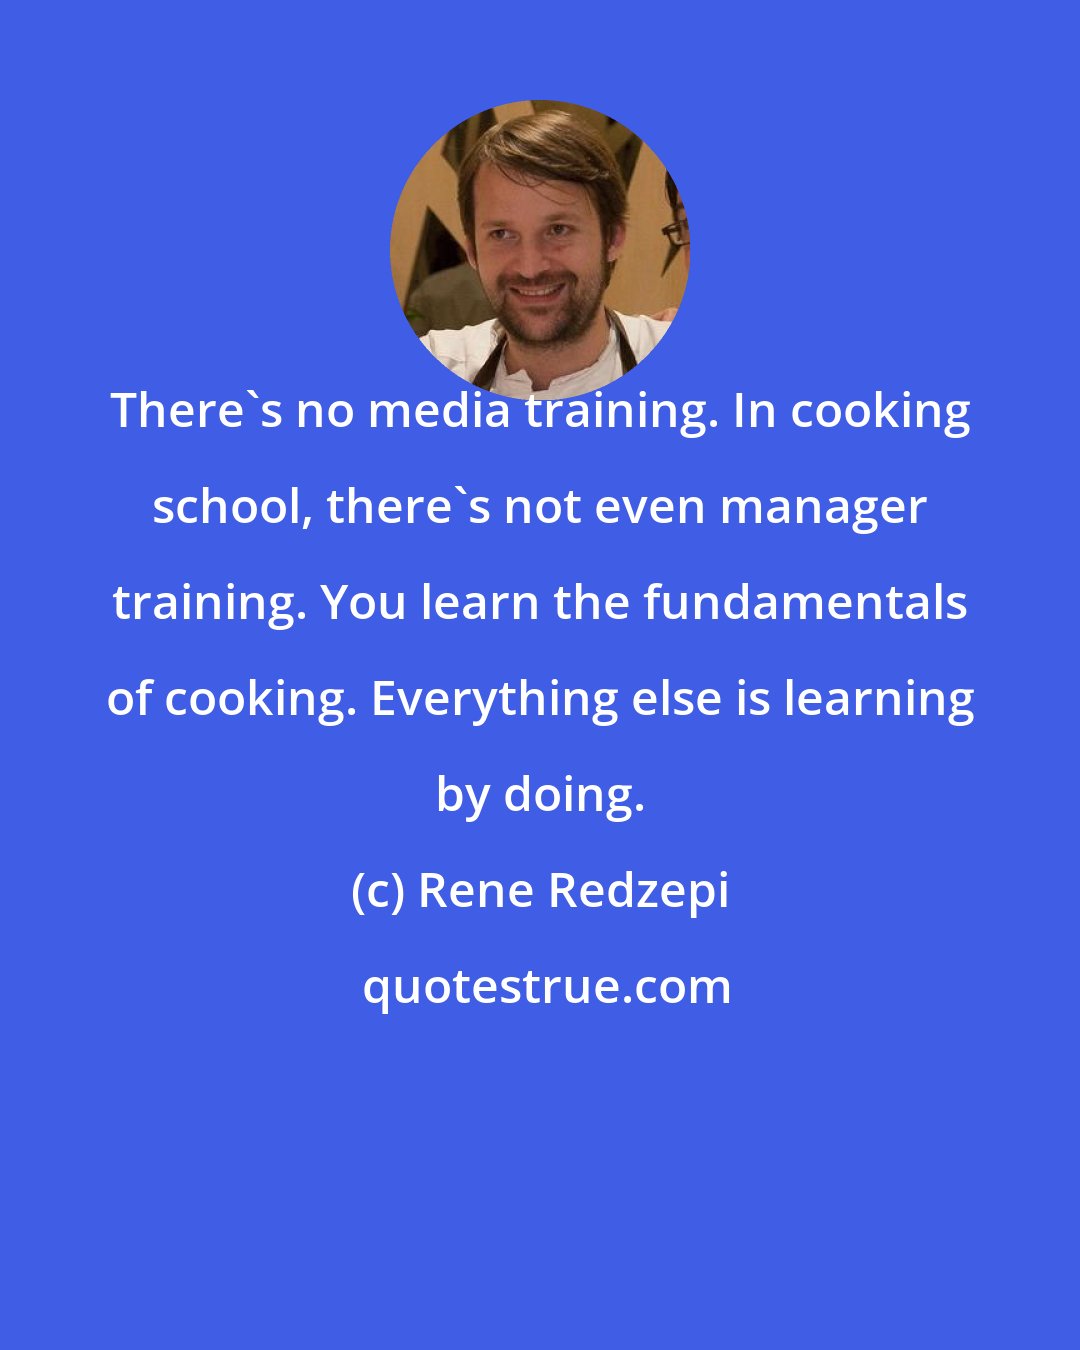 Rene Redzepi: There's no media training. In cooking school, there's not even manager training. You learn the fundamentals of cooking. Everything else is learning by doing.